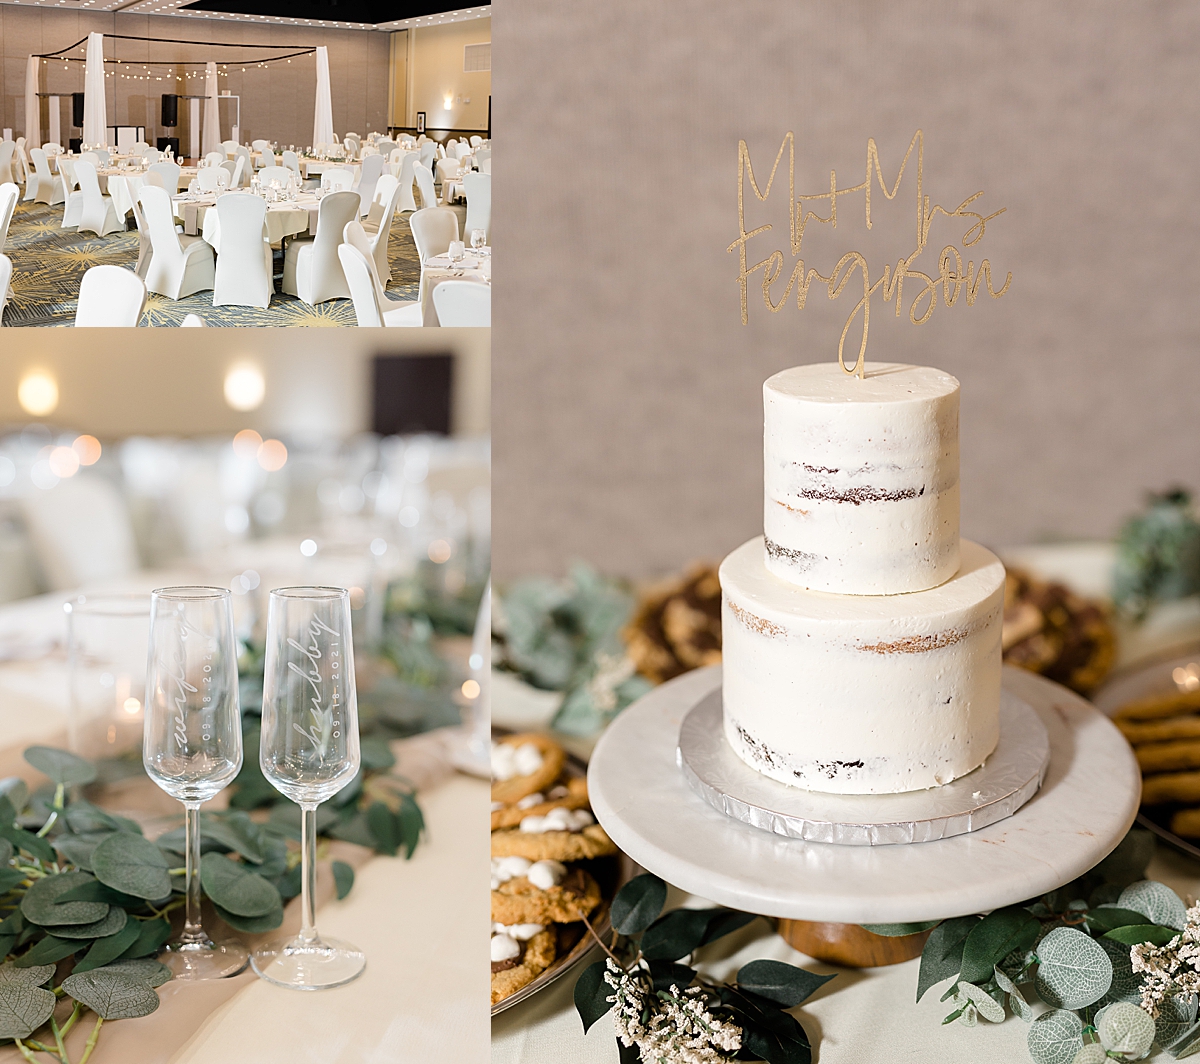 wedding reception space at Hilton garden inn with champagne flutes and wedding cake 